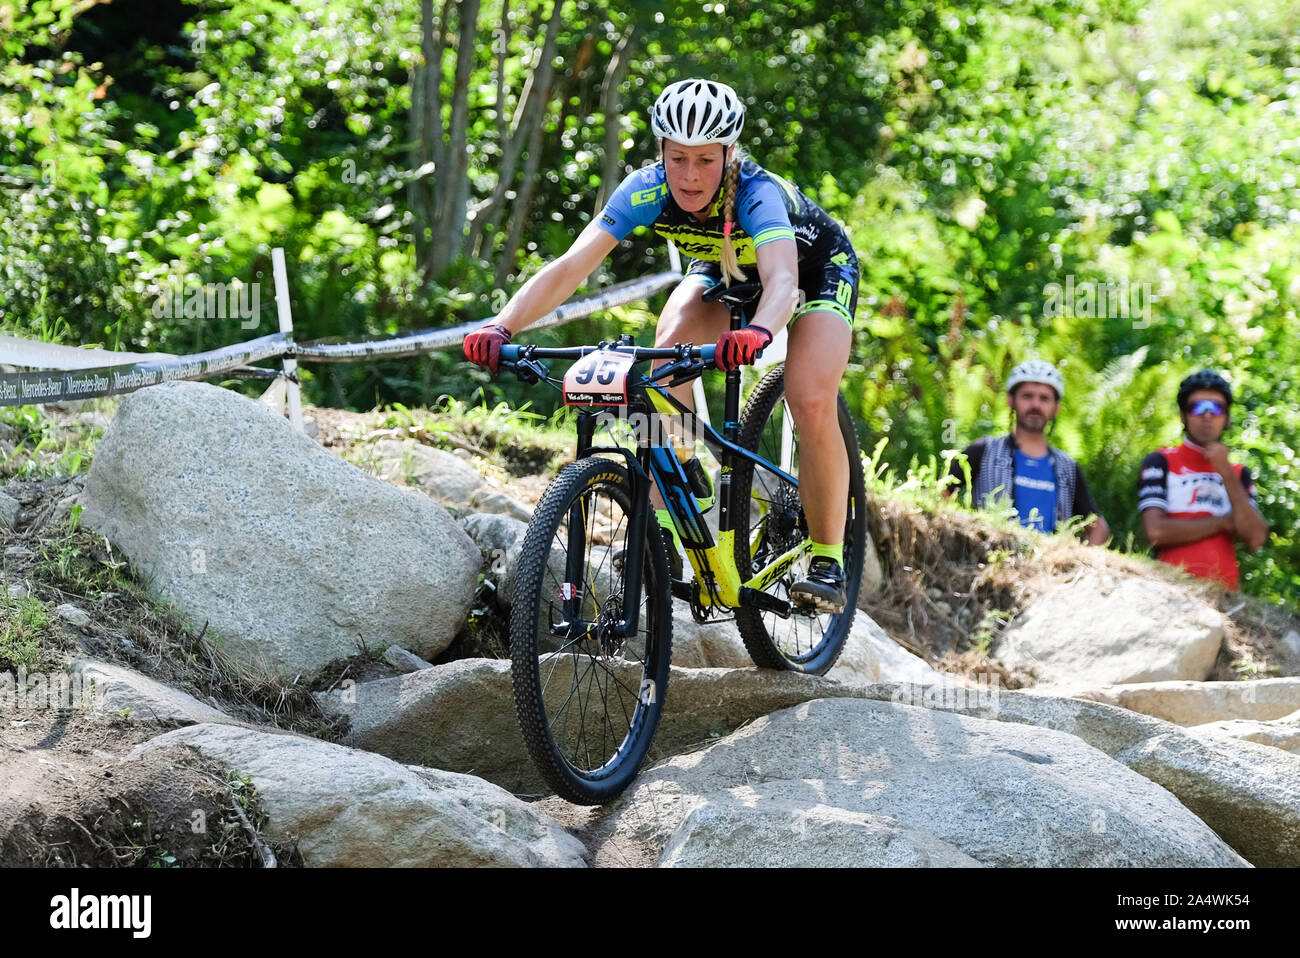 LUCIE VESELA  during Cross-Country World Cup - Val di Sole UCI MTB - Women, Val di Sole, Italy, 04 Aug 2019, Cycling MTB - Mountain Bike Stock Photo